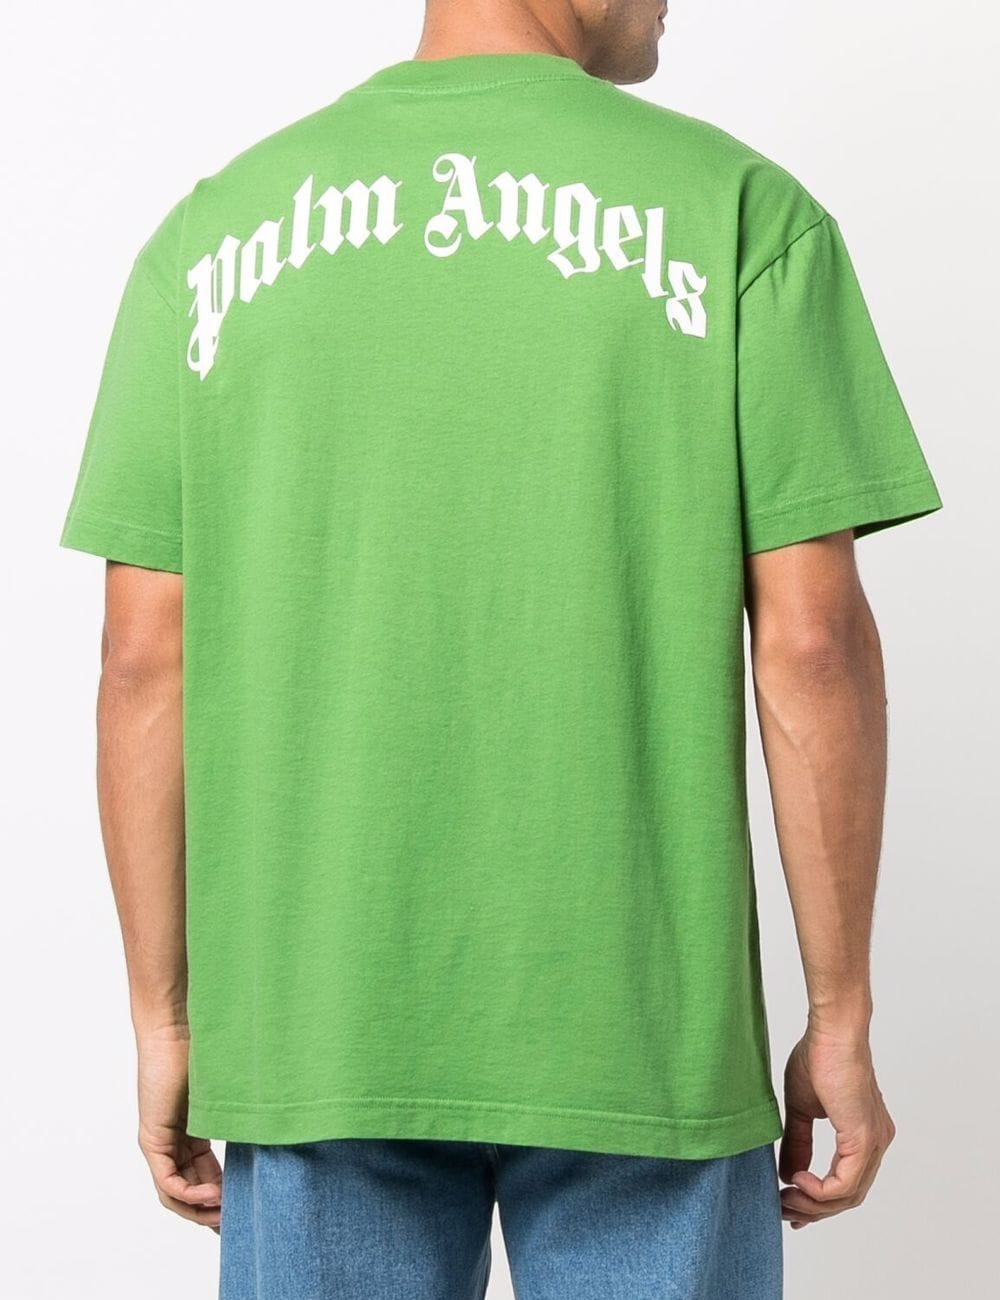 Palm Angels Kill The Bear SS2021 T-Shirt (GREEN) - Shop Streetwear, Sneakers, Slippers and Gifts online | Malaysia - The Factory KL